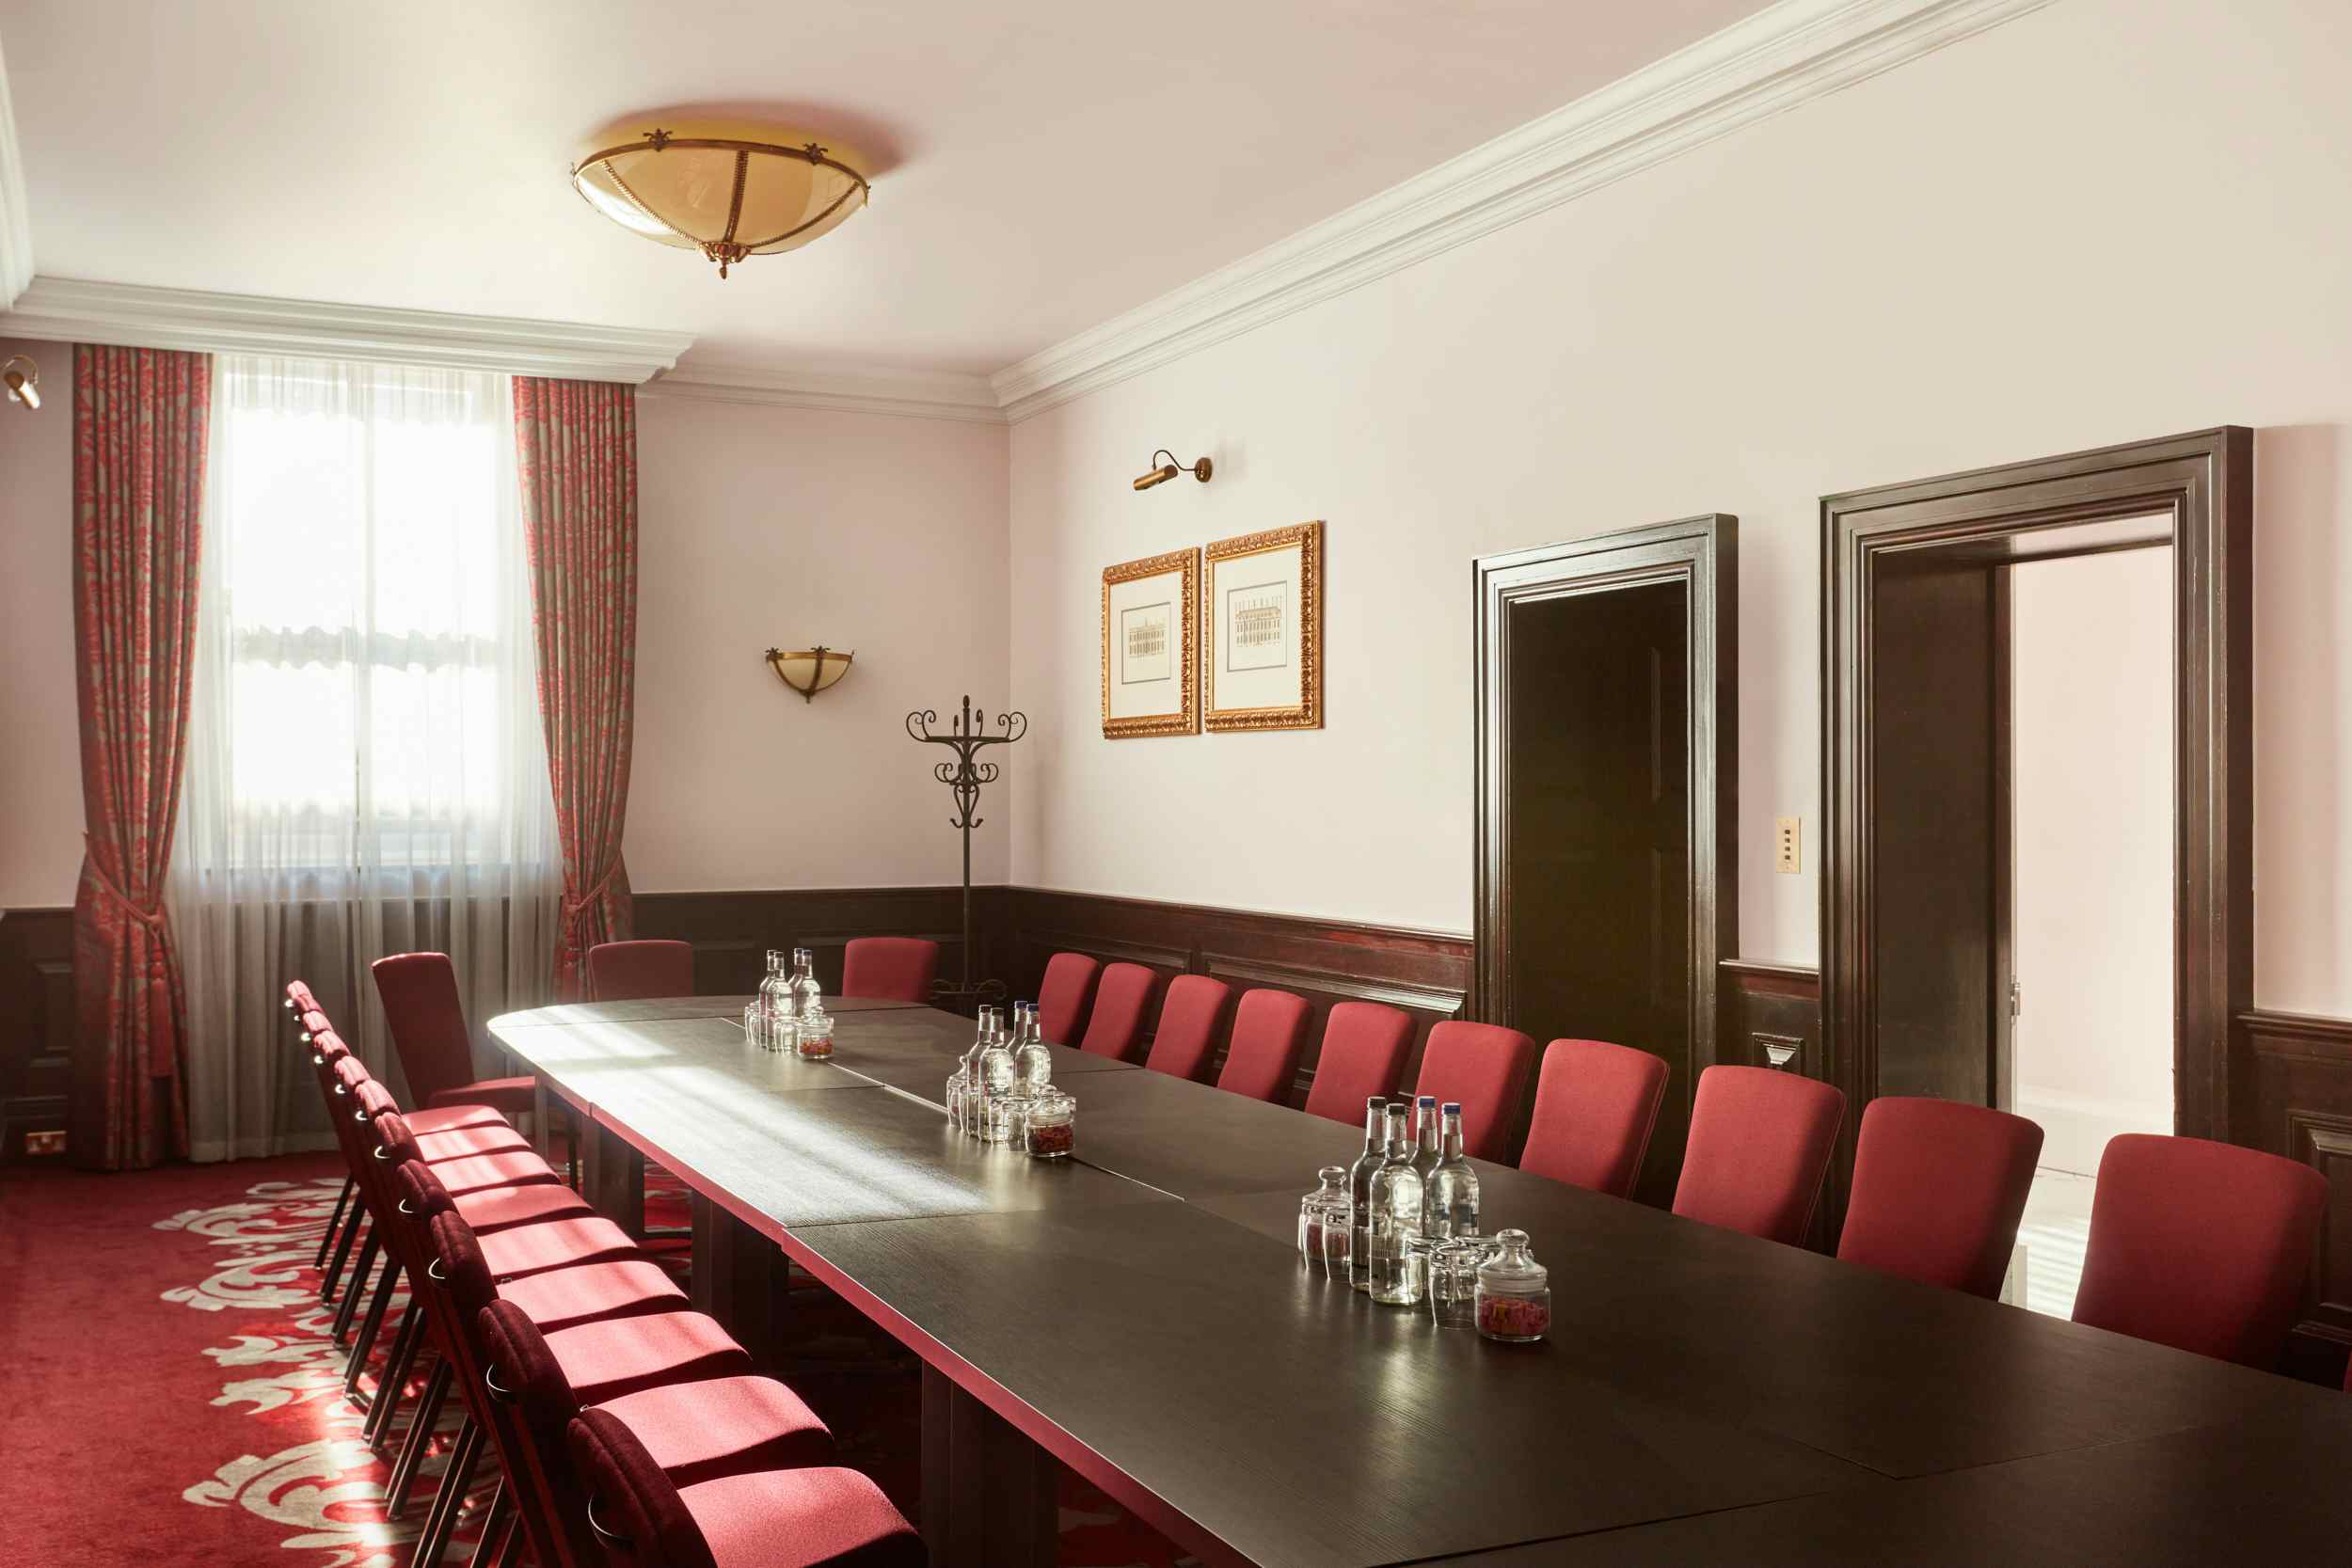 Book The Boardroom at The Clermont Charing Cross. A London Venue for